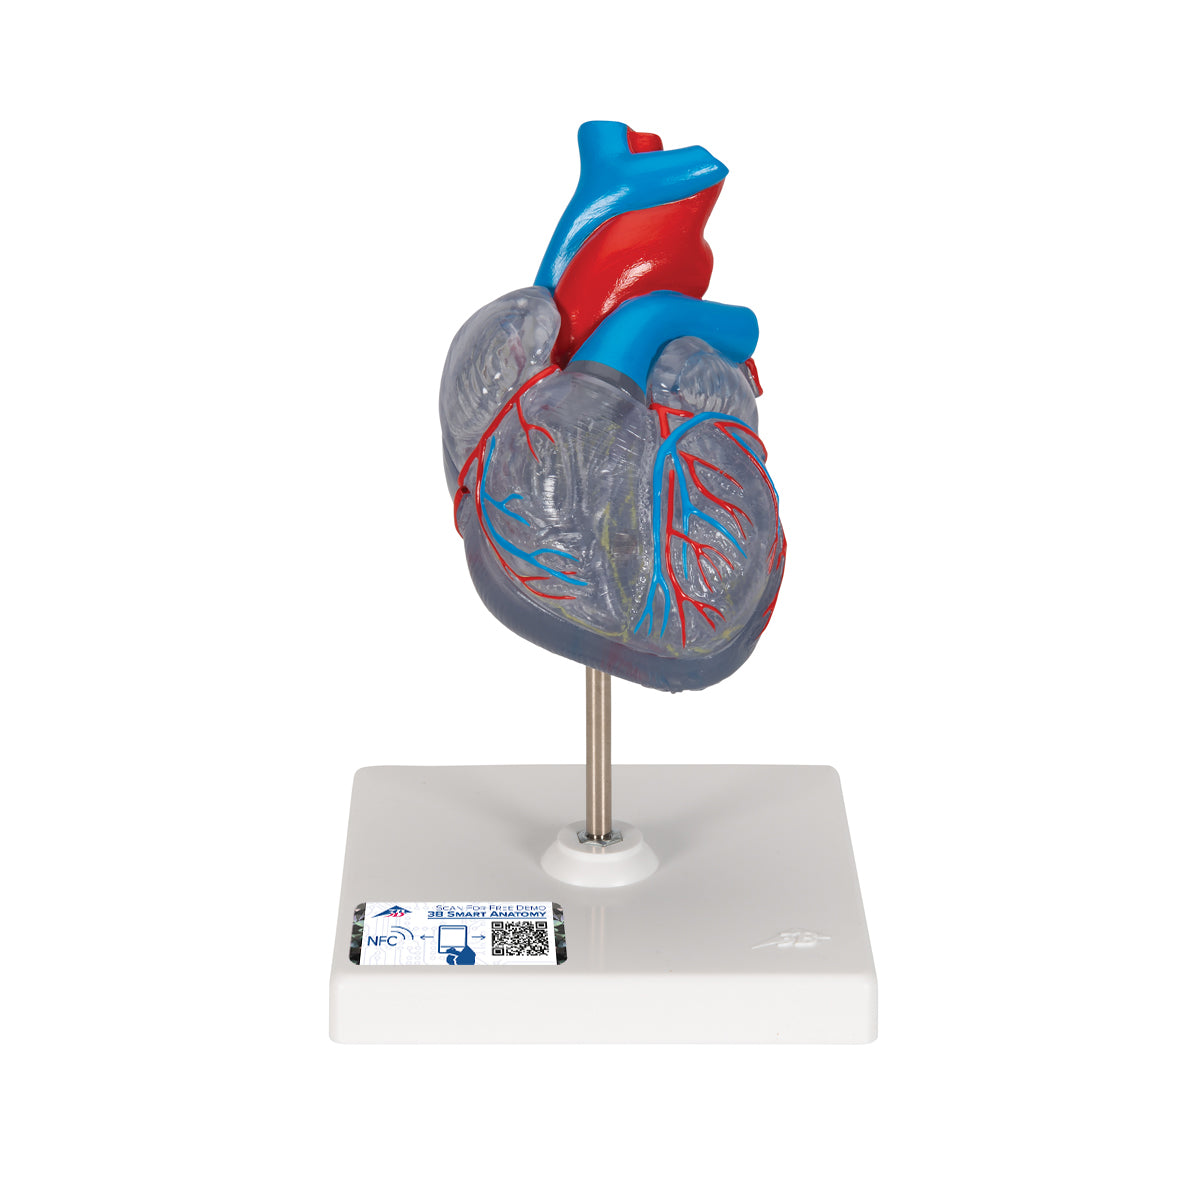 Scaled and transparent heart model with the impulse conduction system